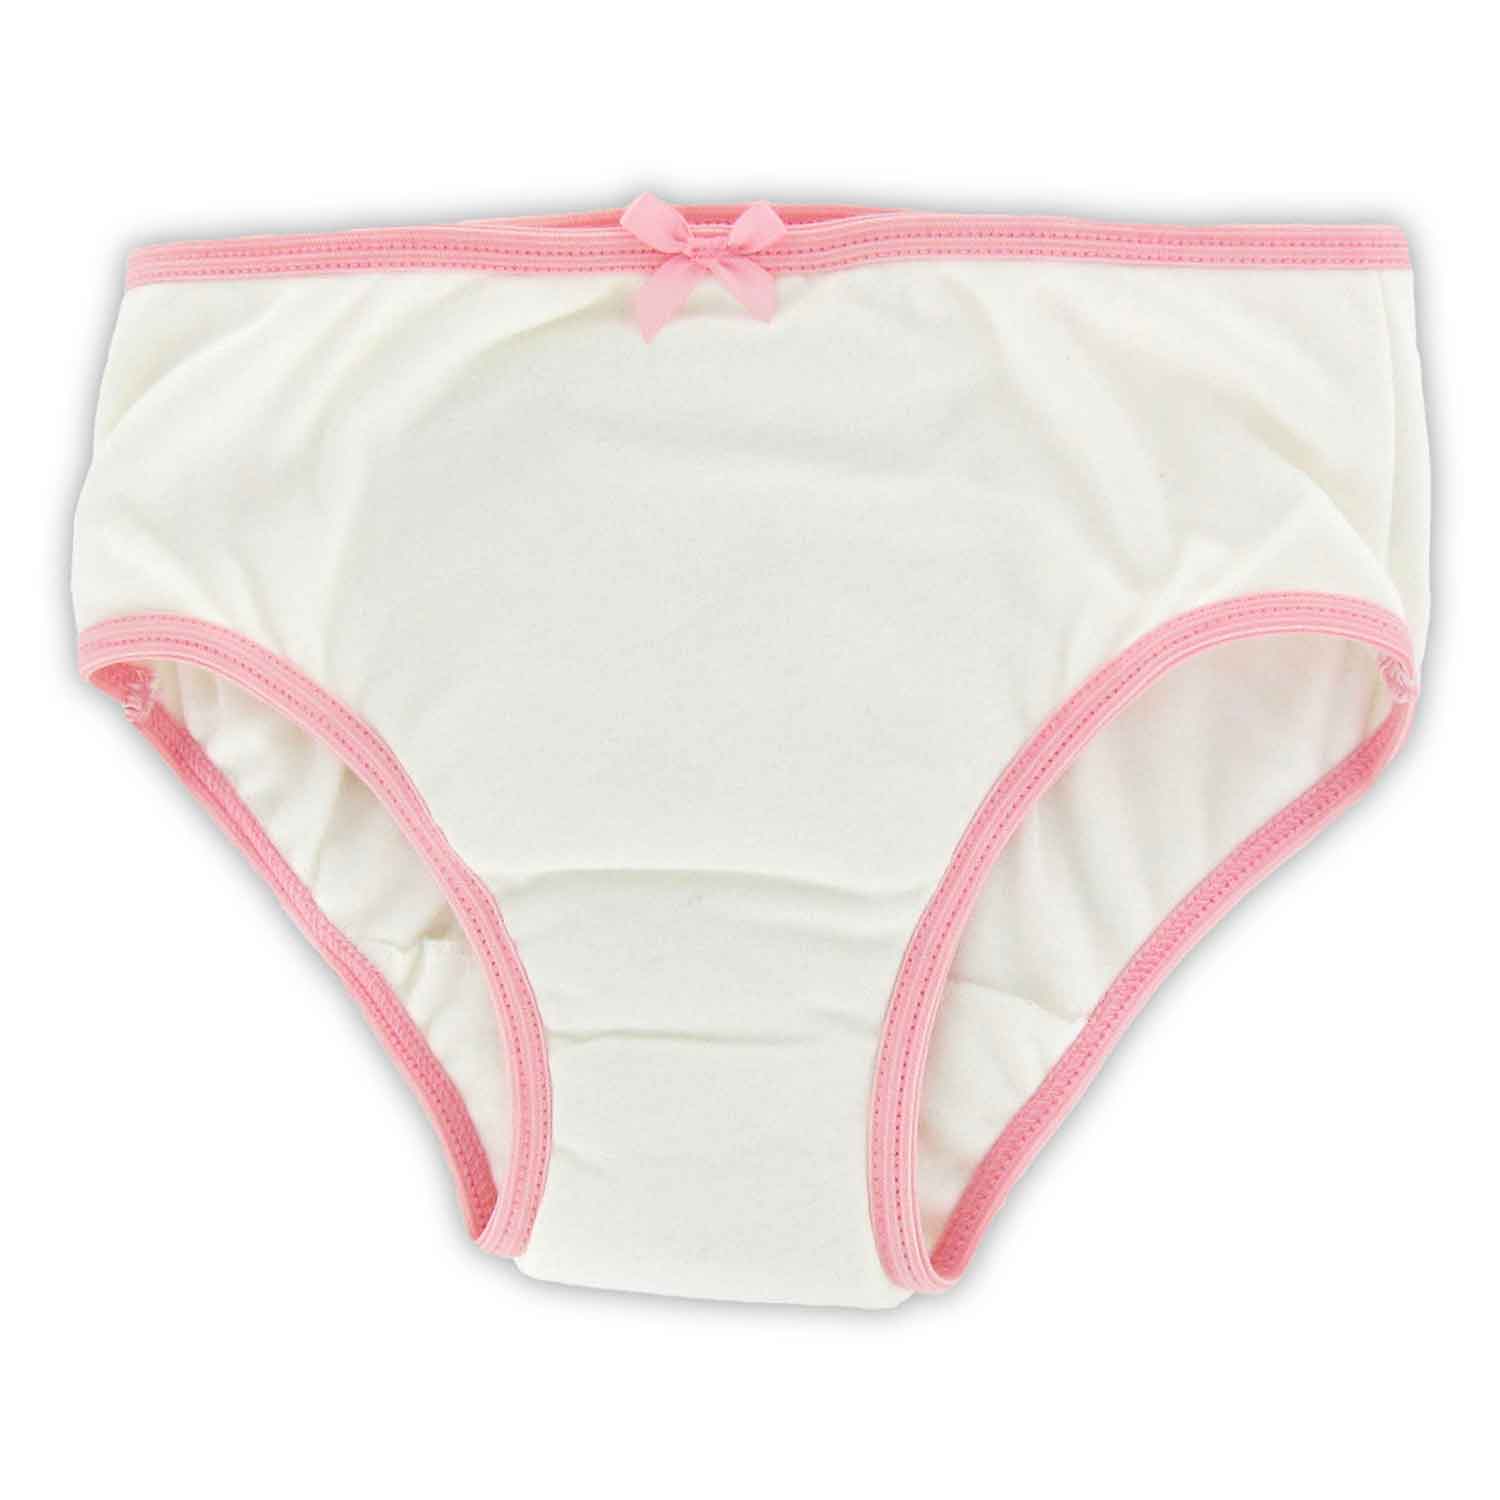 Girls Washable Absorbent Briefs: Bedwetting Store